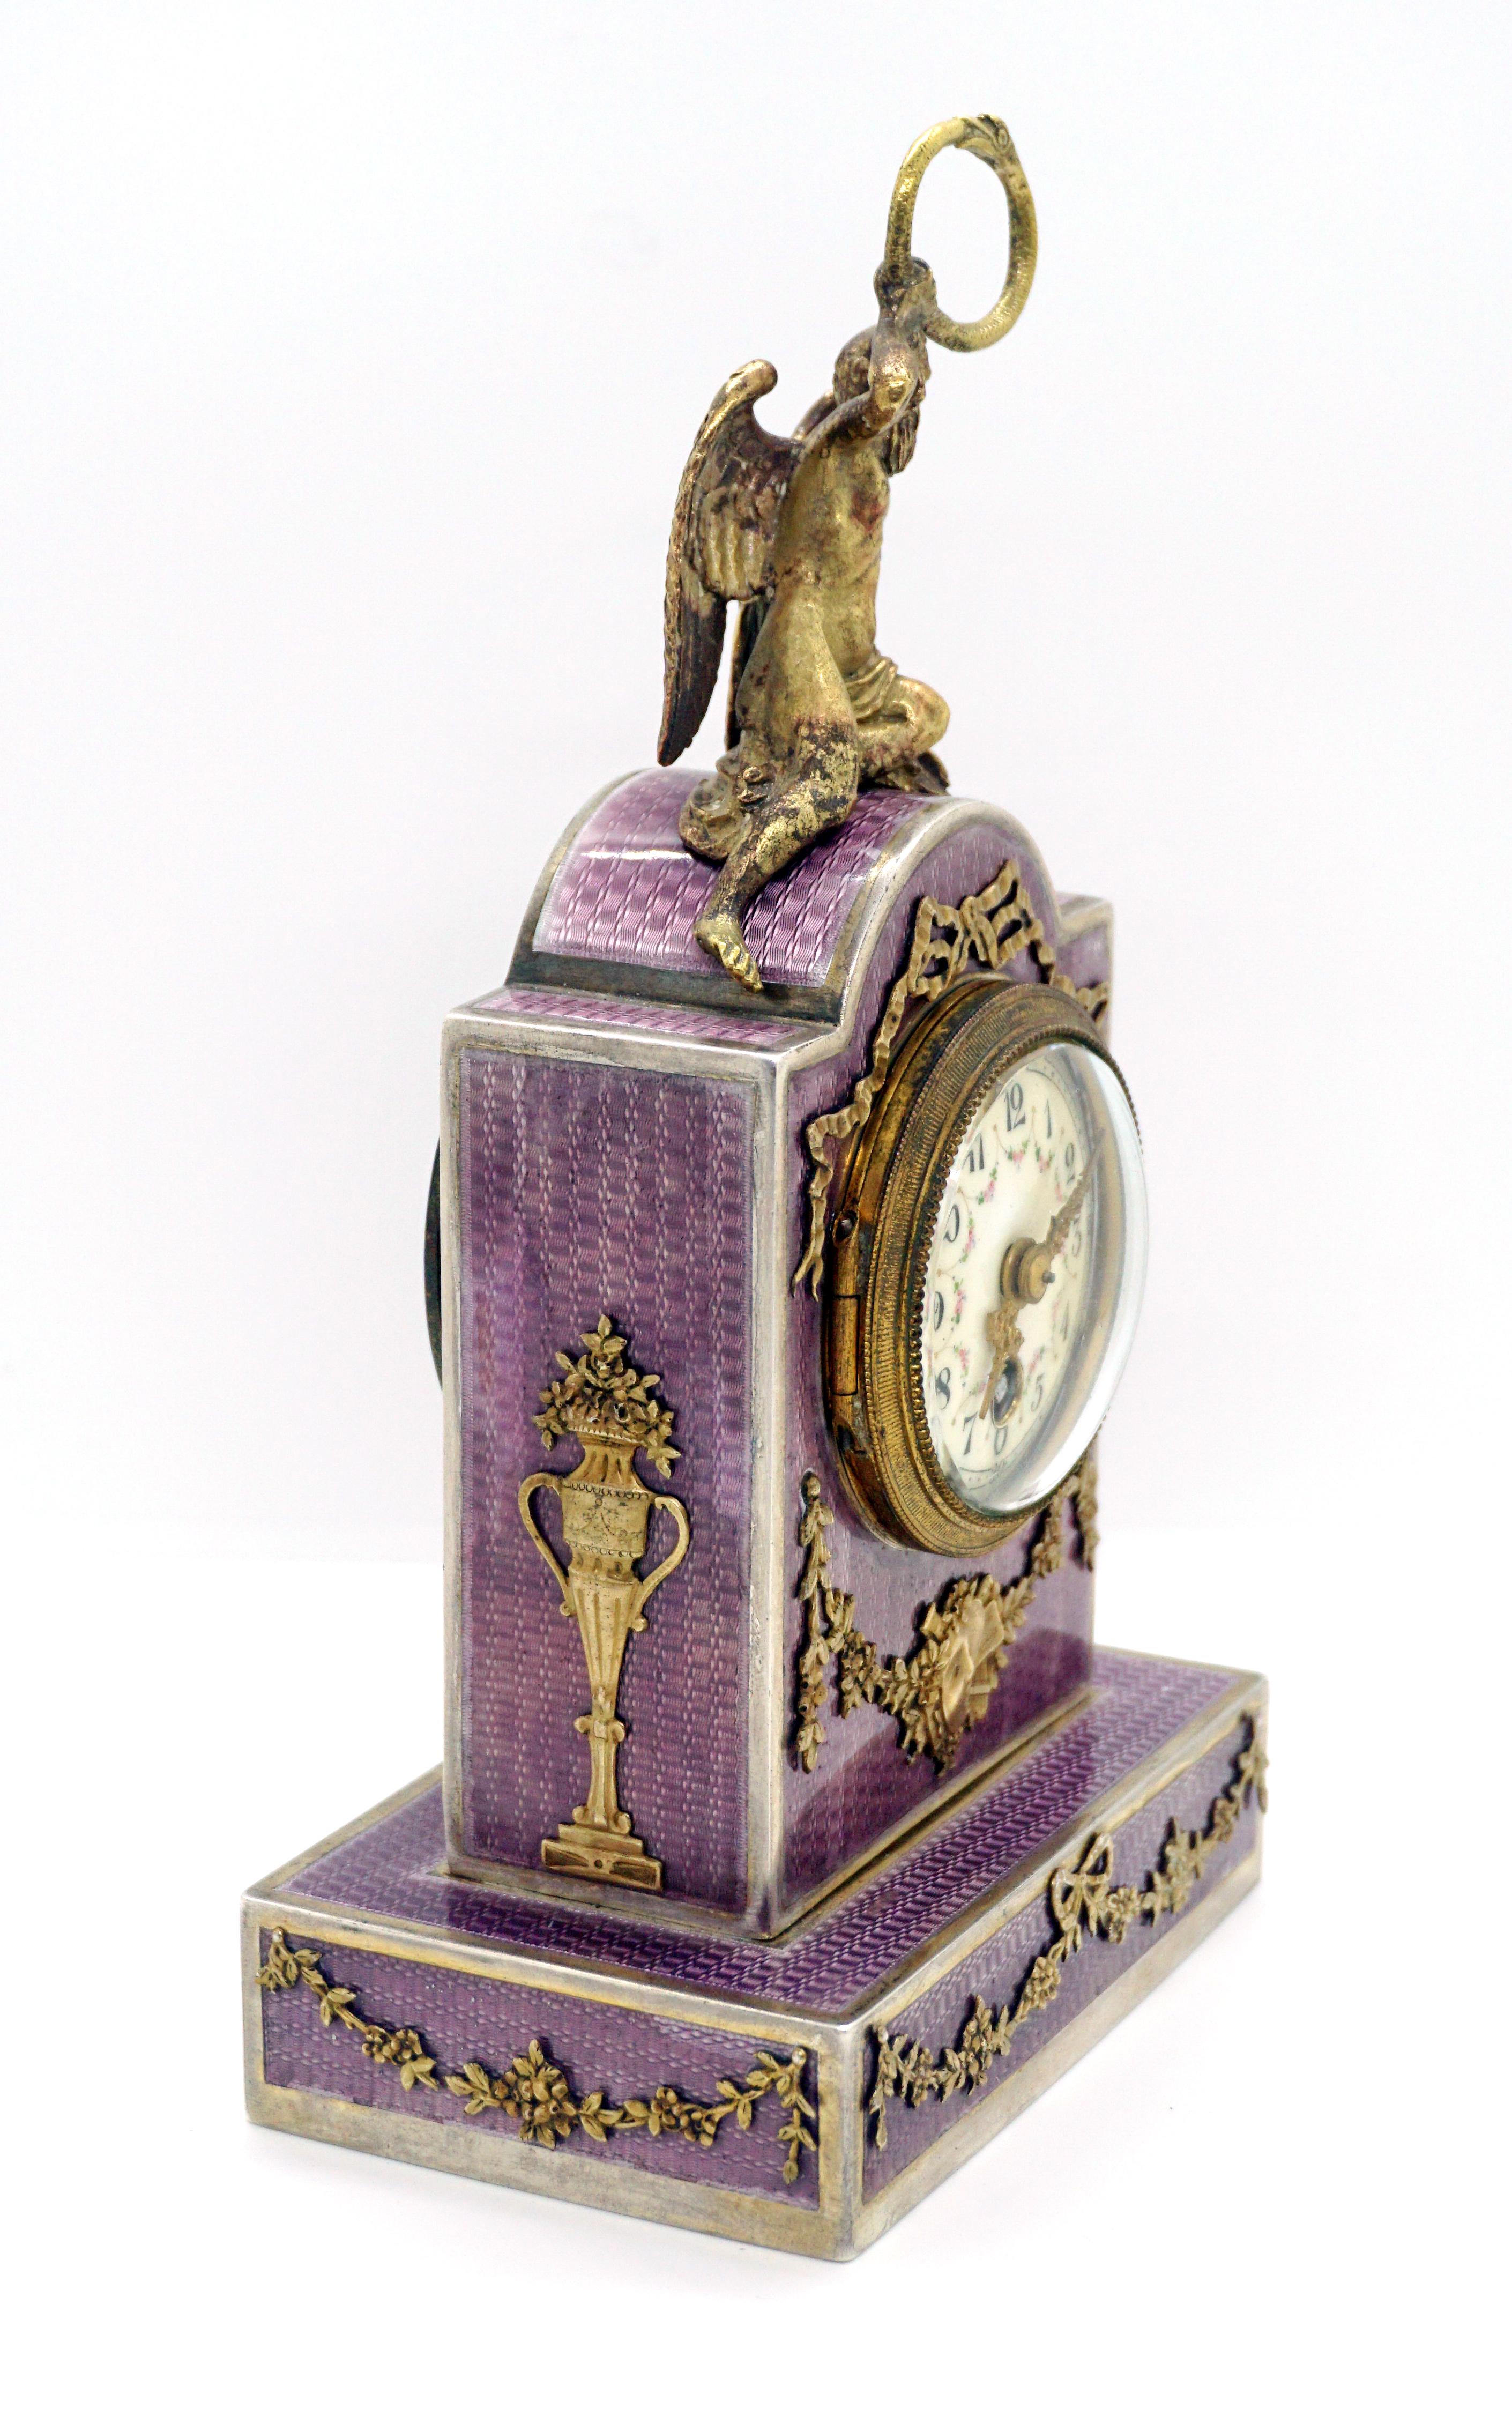 Exquisite French silver enamel table clock from the period circa 1900

Silver case with violet gouilloche enamel, porcelain dial with painted Arabic numerals, enameled floral decor and gold hands. Richly decorated with floral applications made of